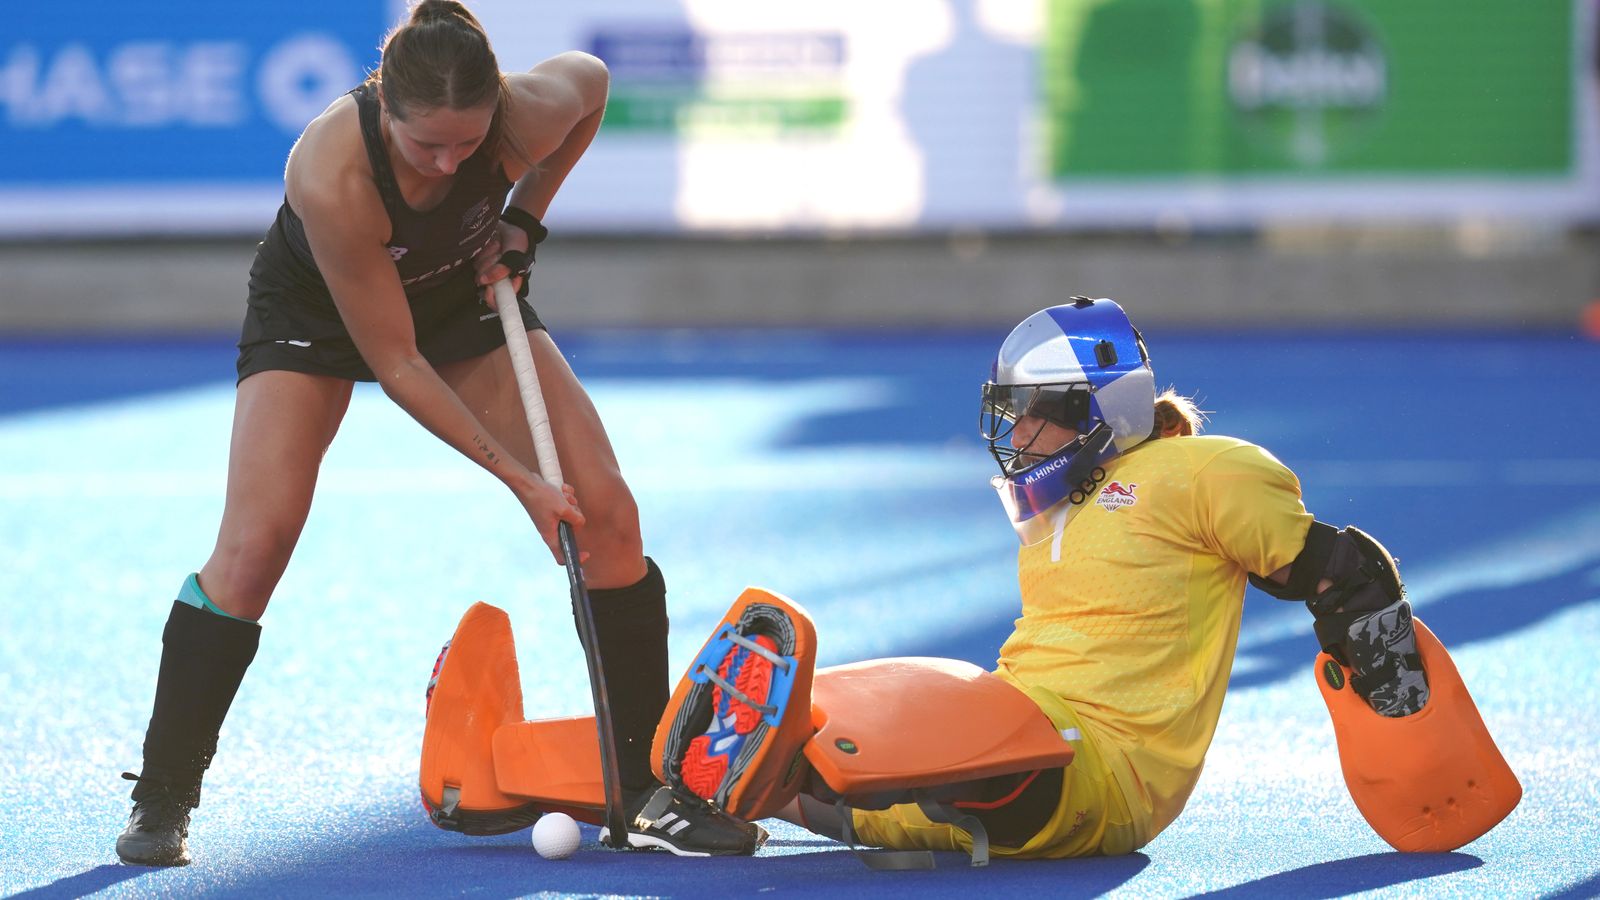 Commonwealth Games: England beat New Zealand in shootout to reach women’s hockey final | Adam Gemili crashes out of 200m